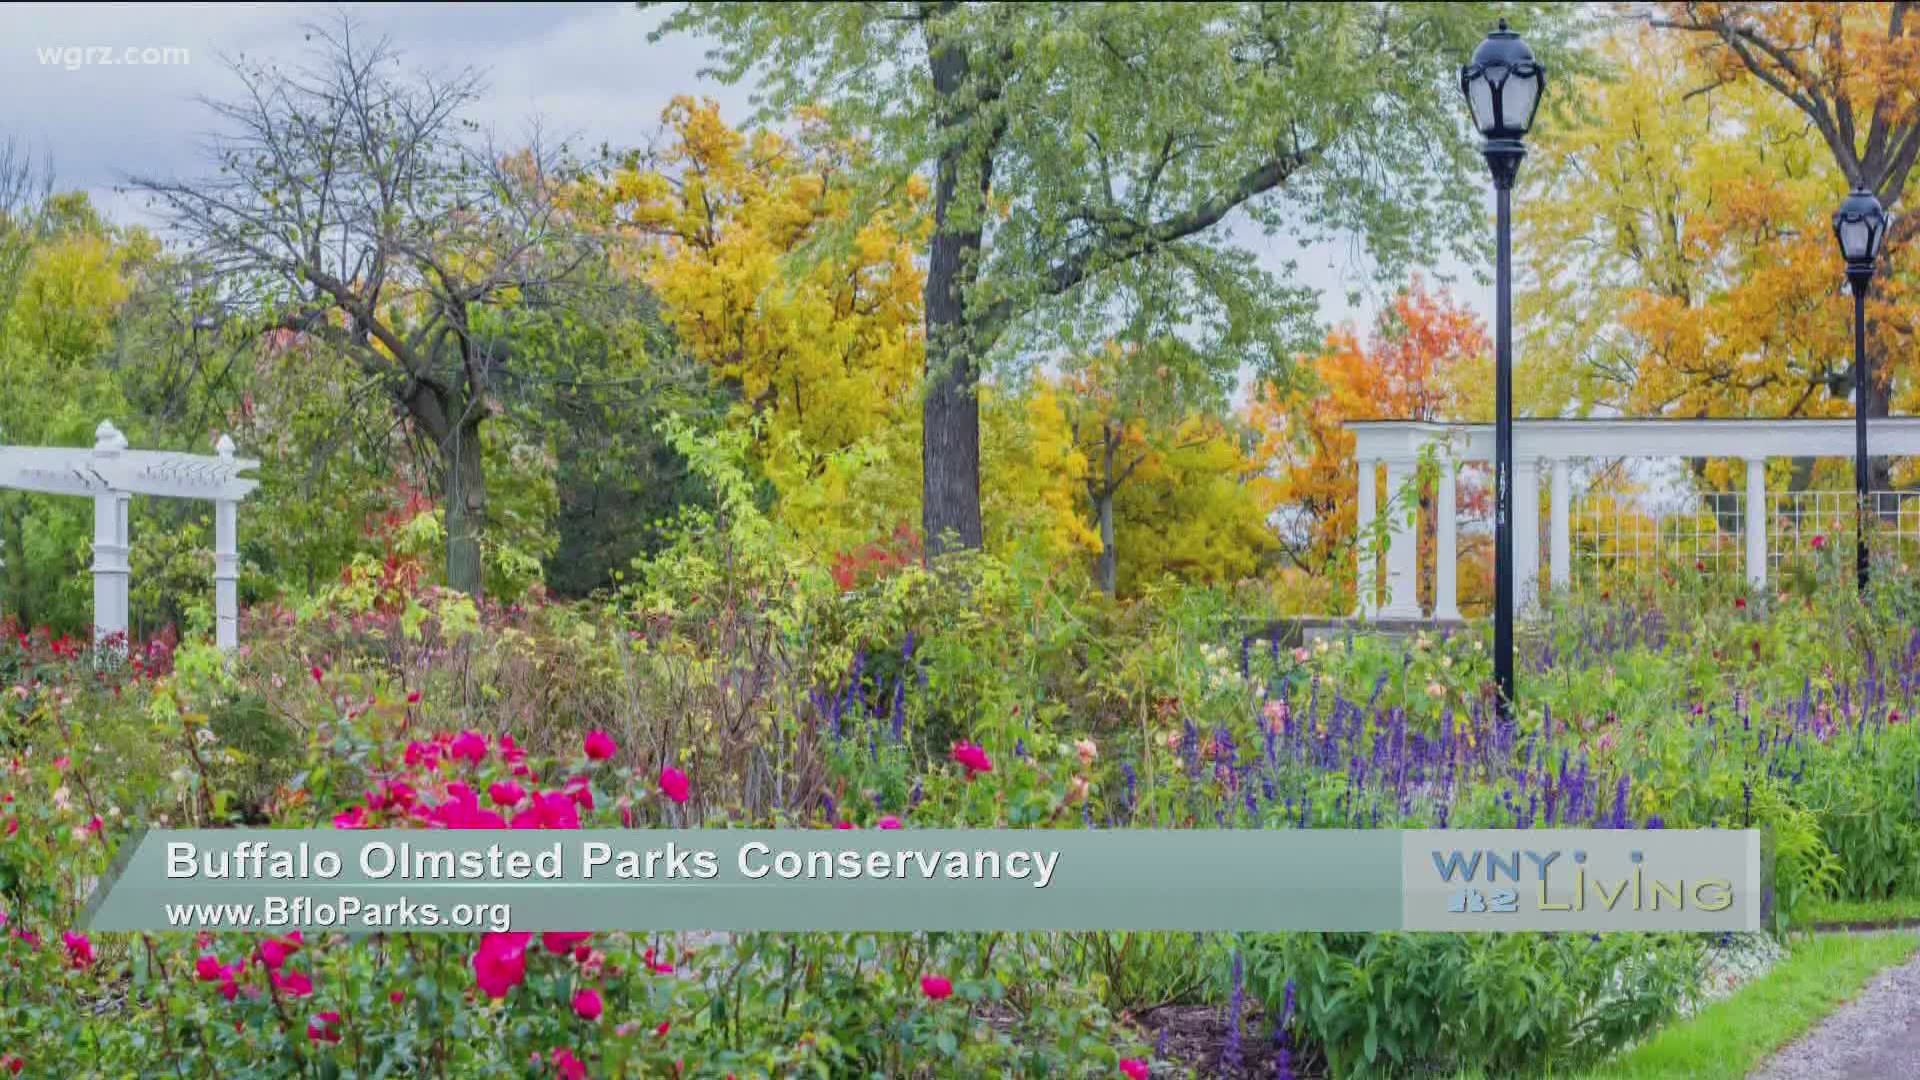 WNY Living - May 15 - Buffalo Olmsted Parks Conservancy (THIS VIDEO IS SPONSORED BY BUFFALO OLMSTED PARKS CONSERVANCY)